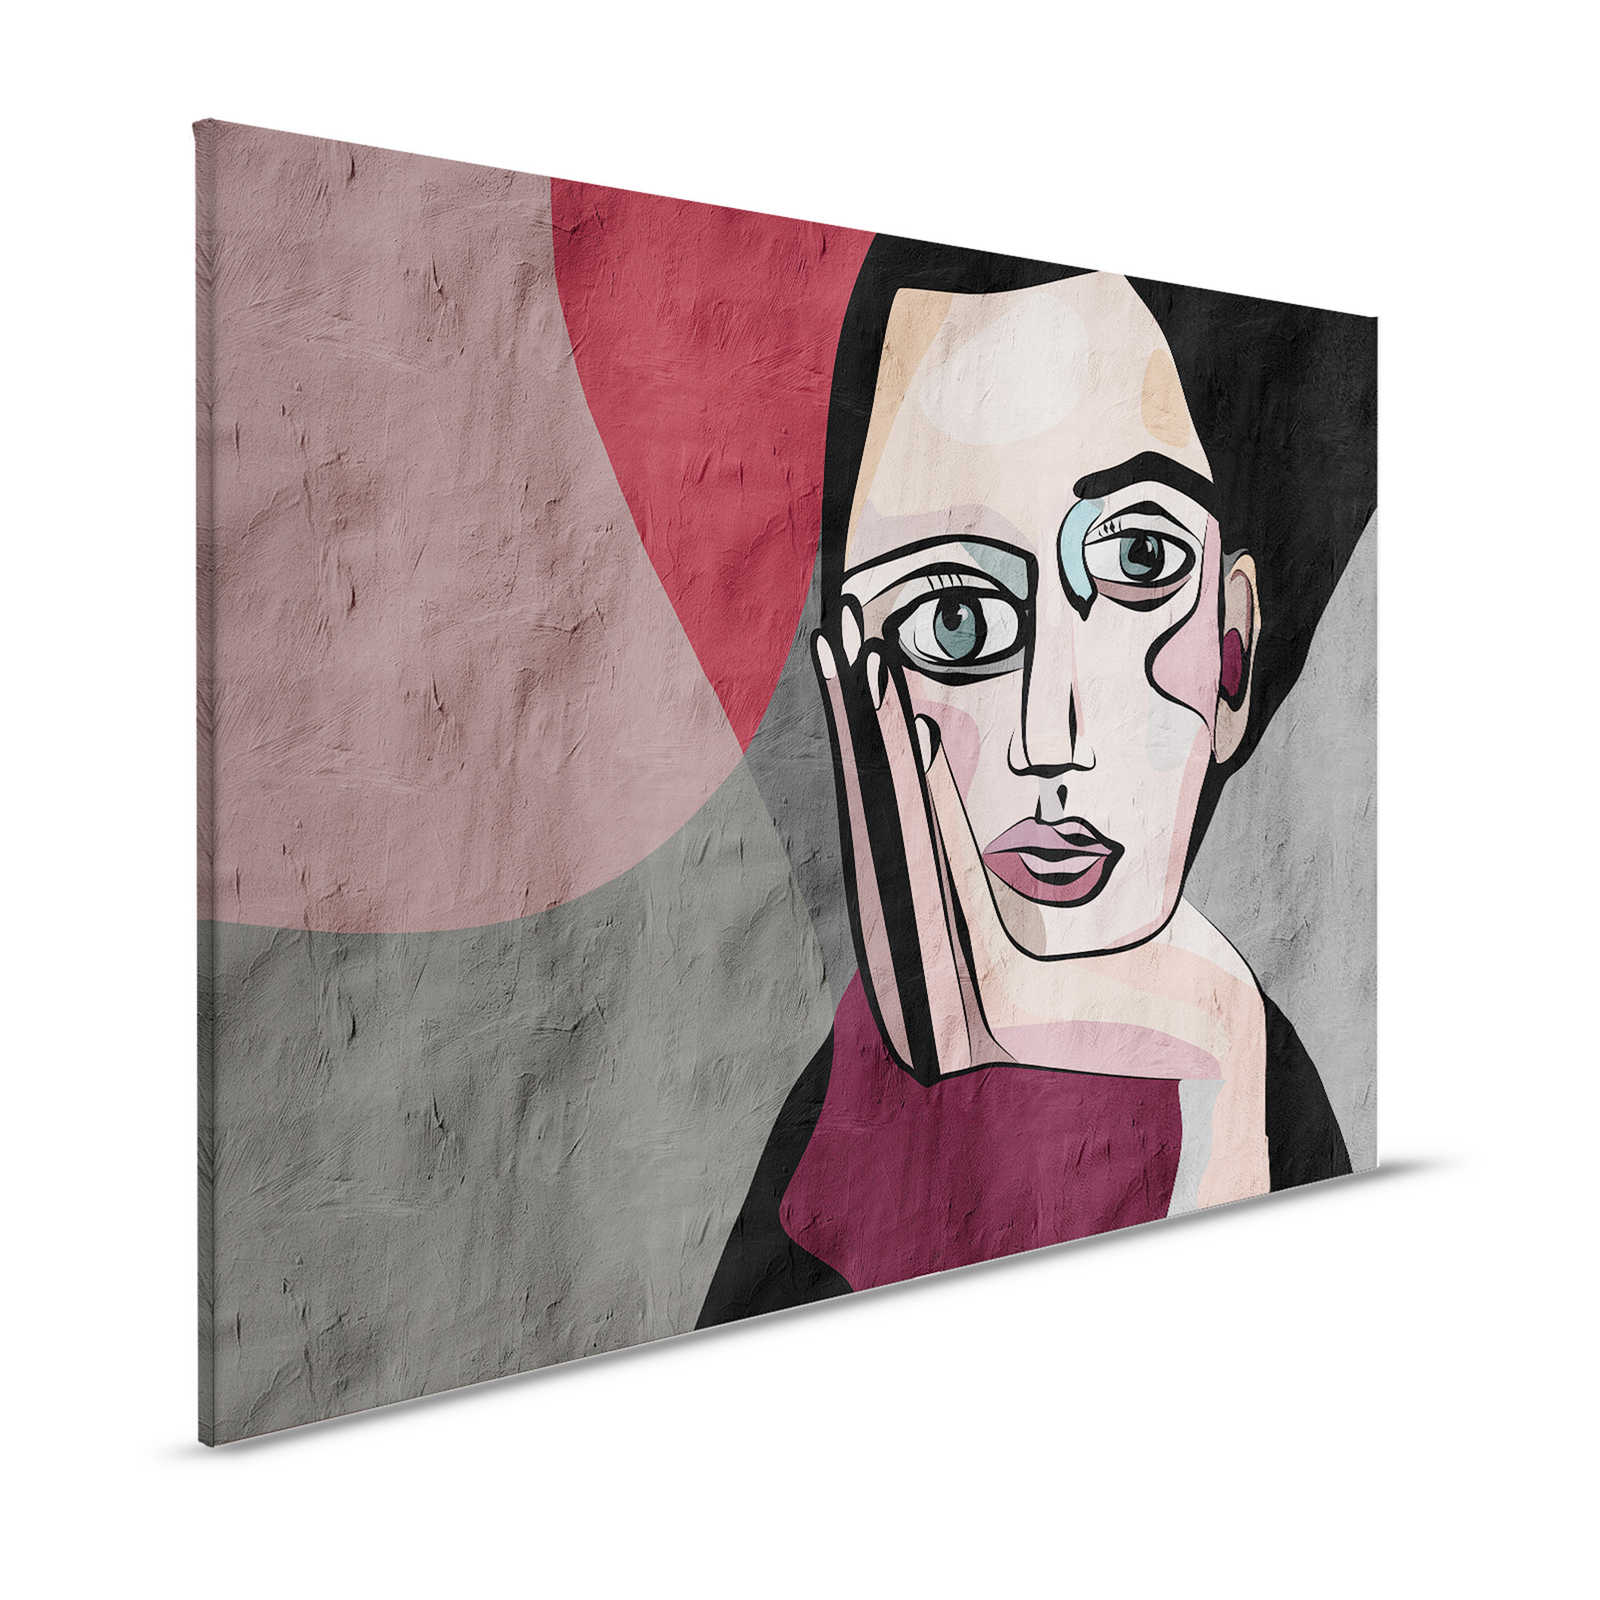 Think Tank 1 - Canvas painting abstract graffiti women face - 1,20 m x 0,80 m
